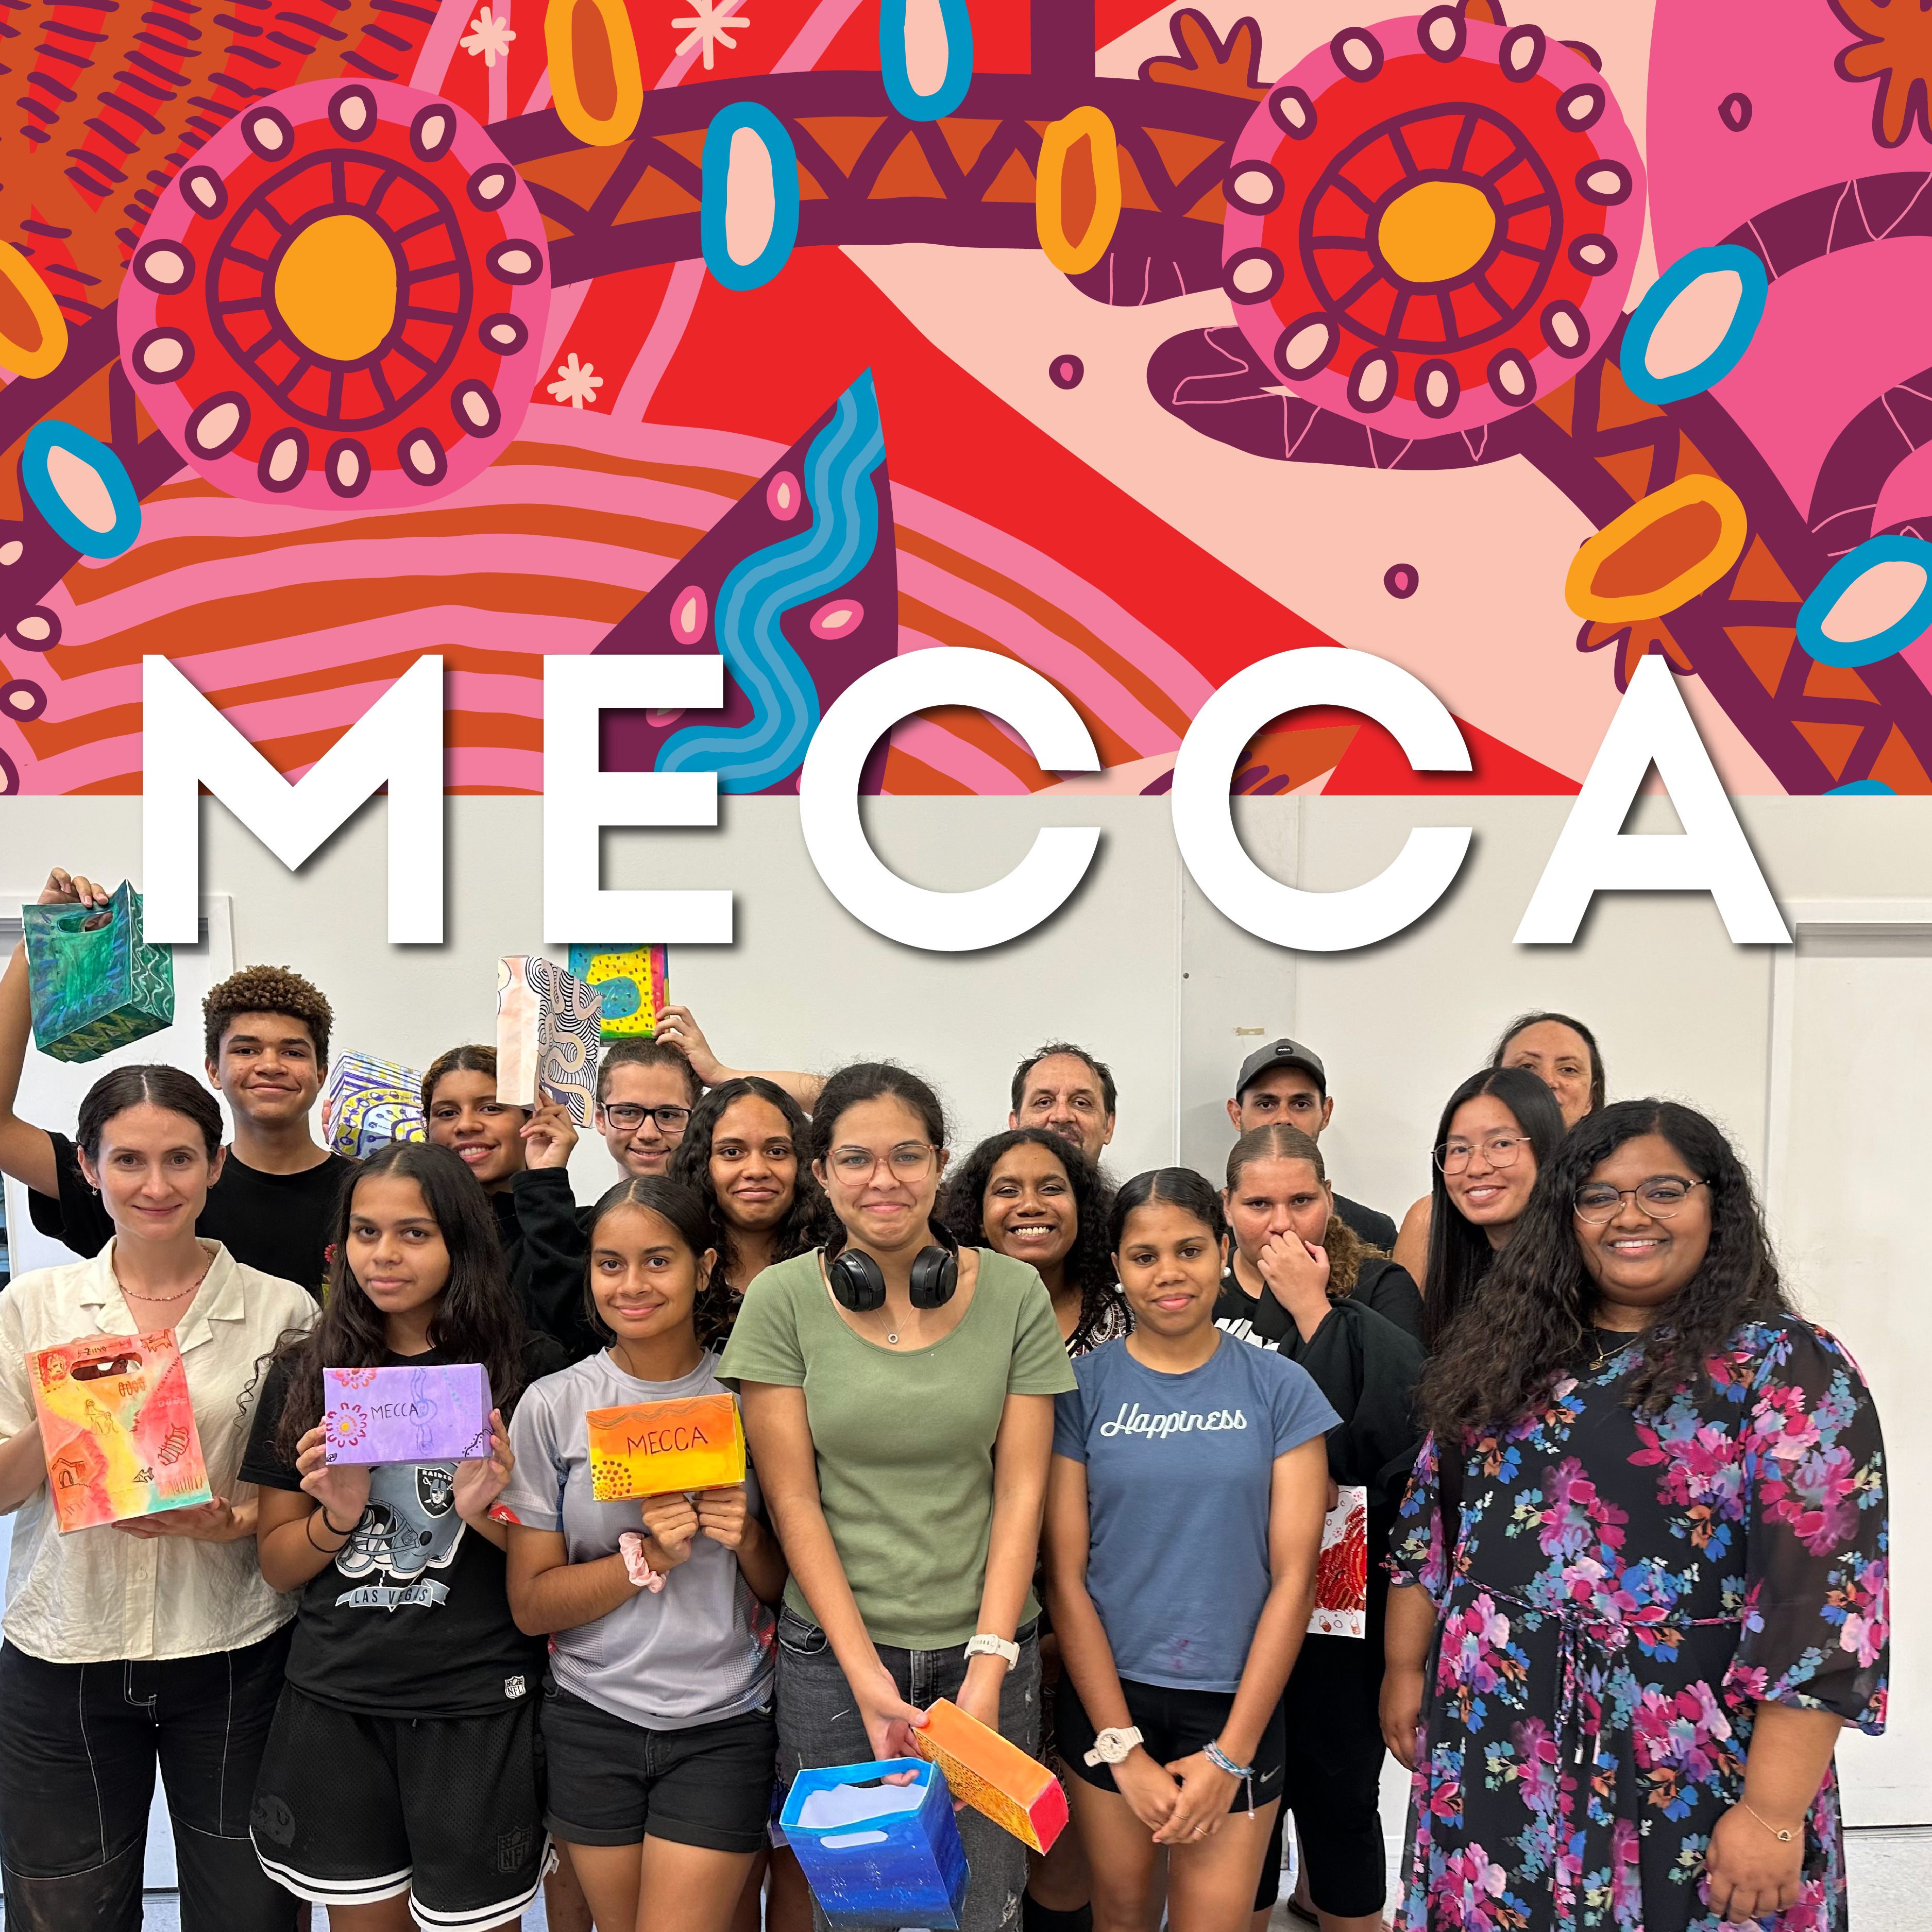 The top half of the image is a design of bright colours by IndigeDesign Labs for MECCA. The bottom half is a group photo of IndigeDesign Labs participants looking happy with their handmade designs and inspiration from a workshop. The text 'MECCA' is in white letters and runs in the middle of the two images.